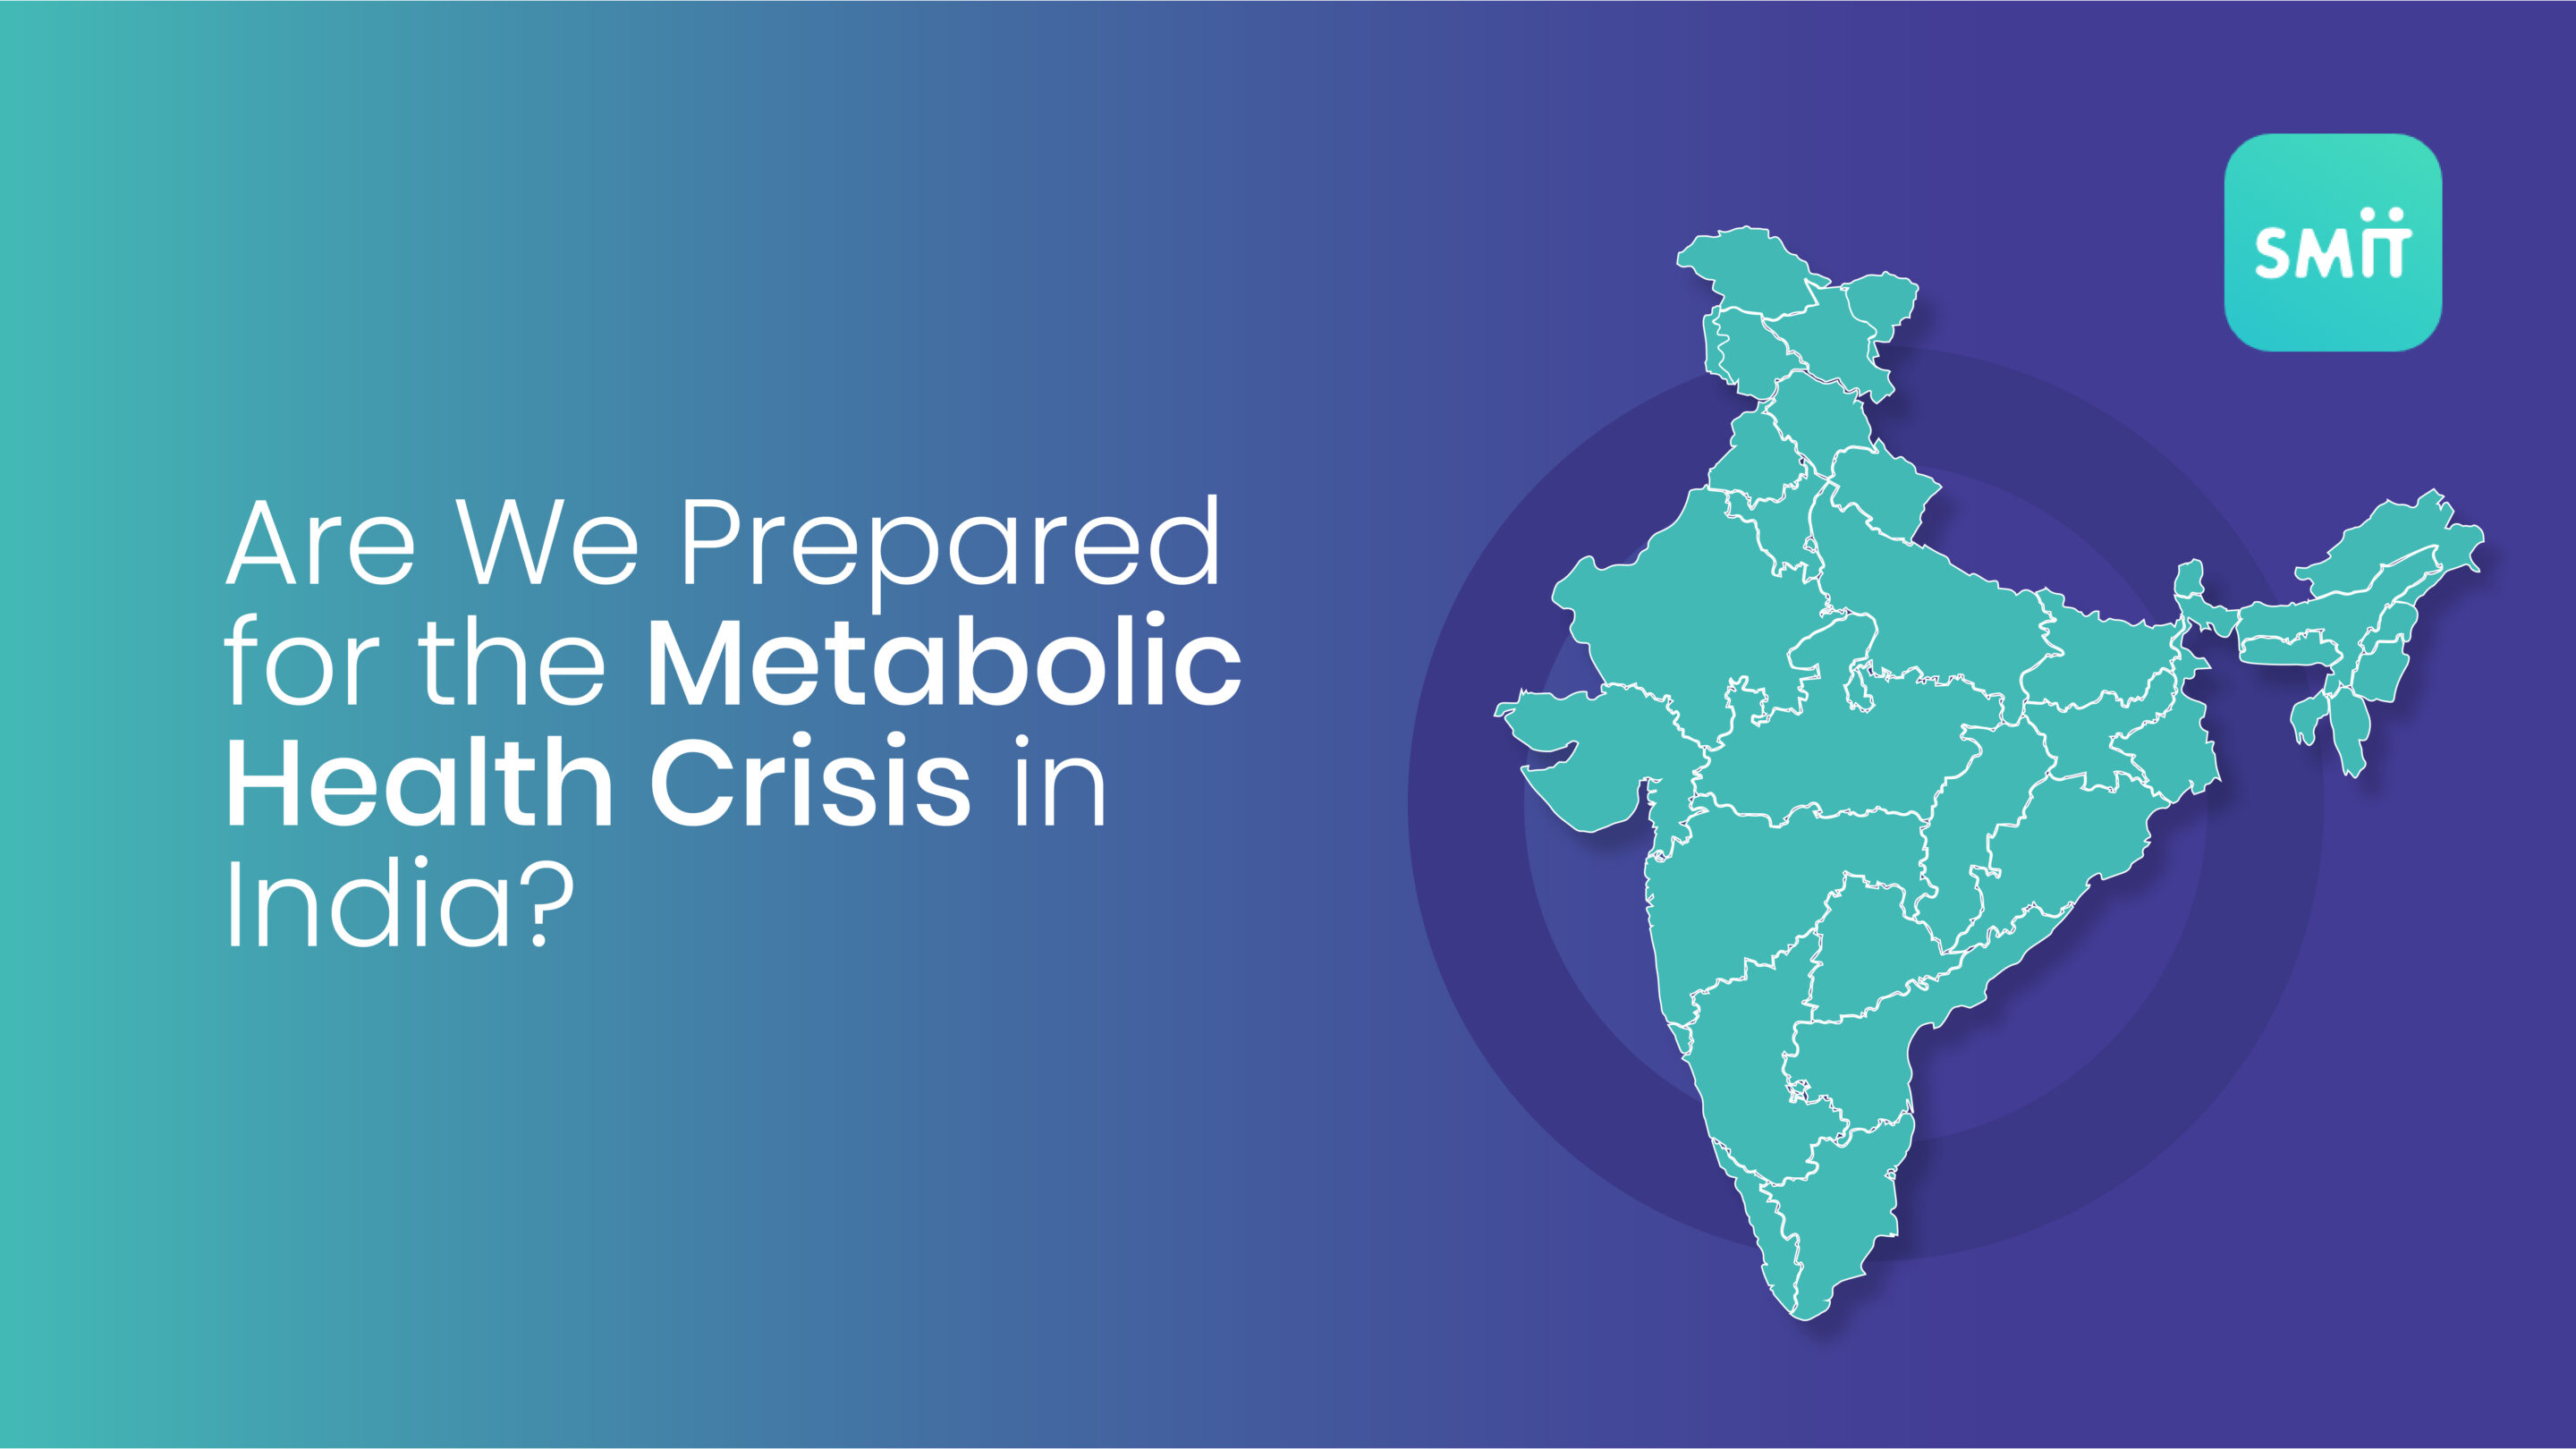 Metabolic health crisis in India